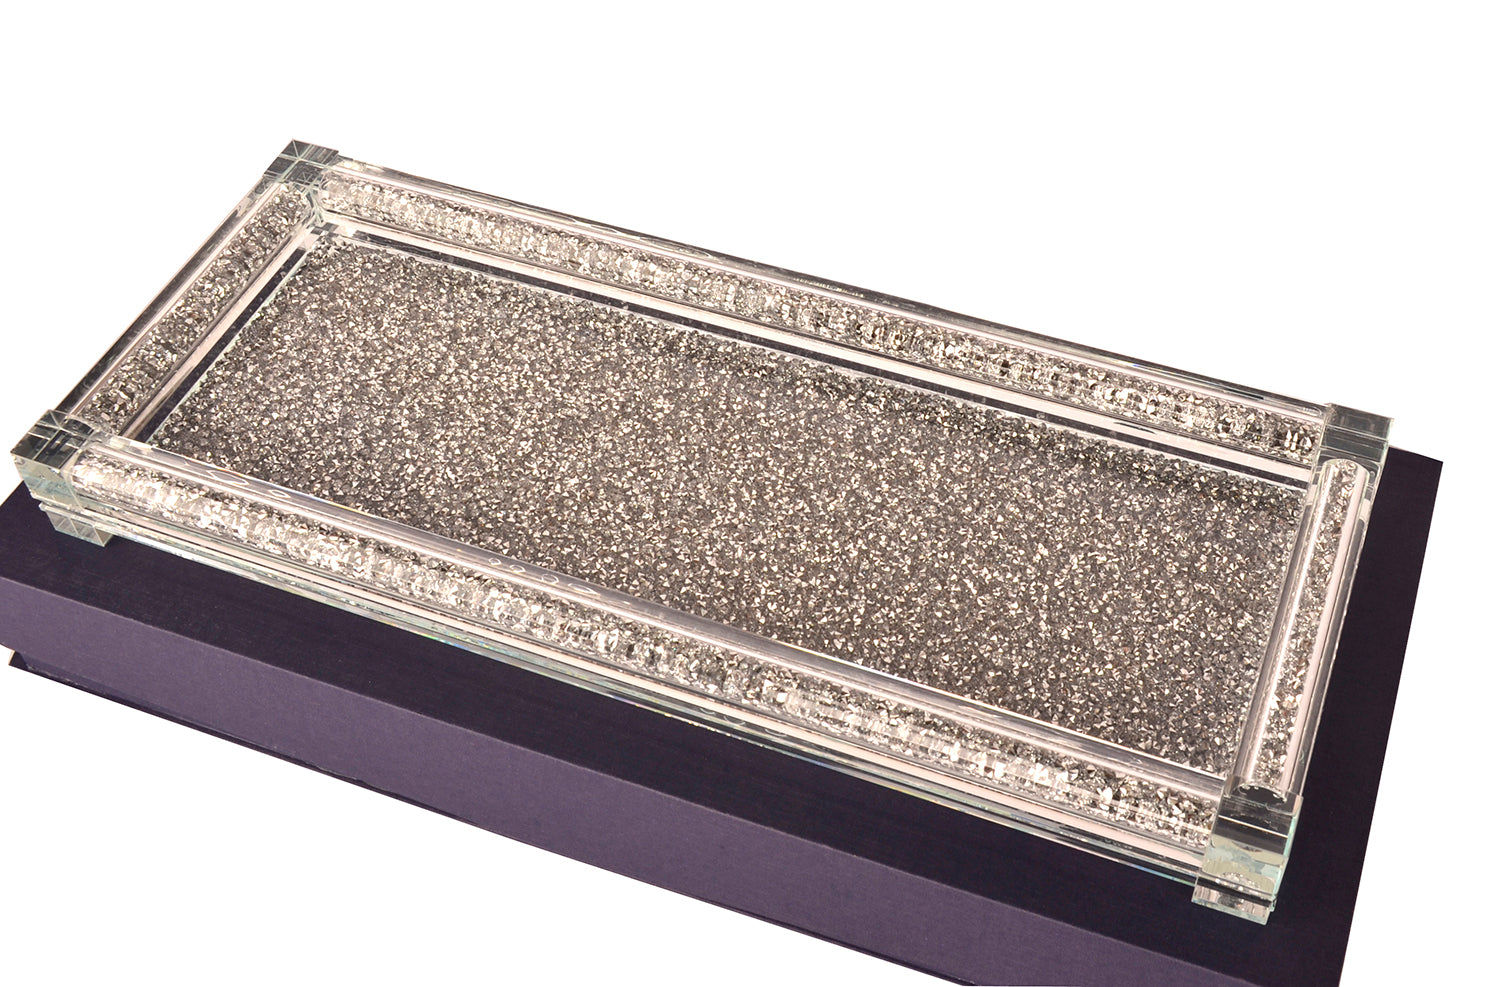 Ambrose Exquisite Medium Glass Tray in Gift Box silver-glass